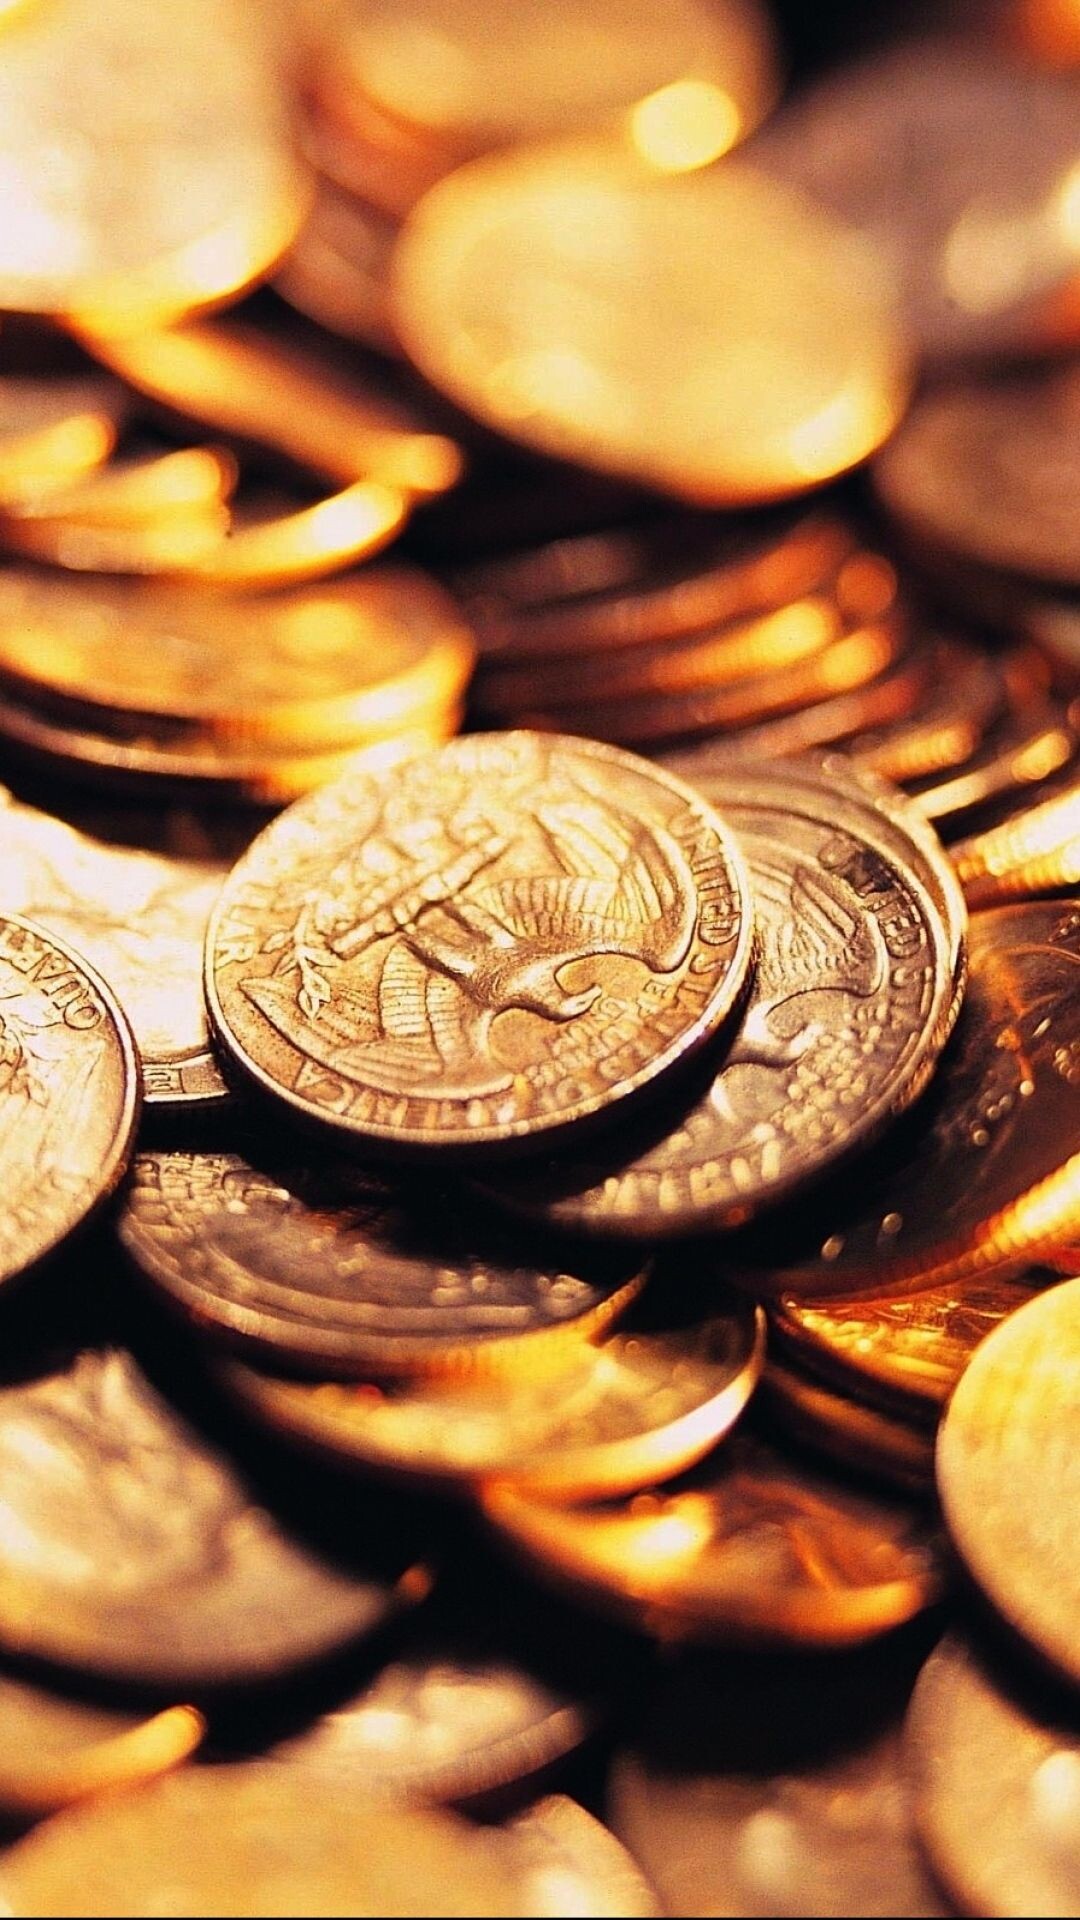 Gold Coins: Scattering of USA money made of yellow metal, Liberty Head quarter eagle. 1080x1920 Full HD Wallpaper.